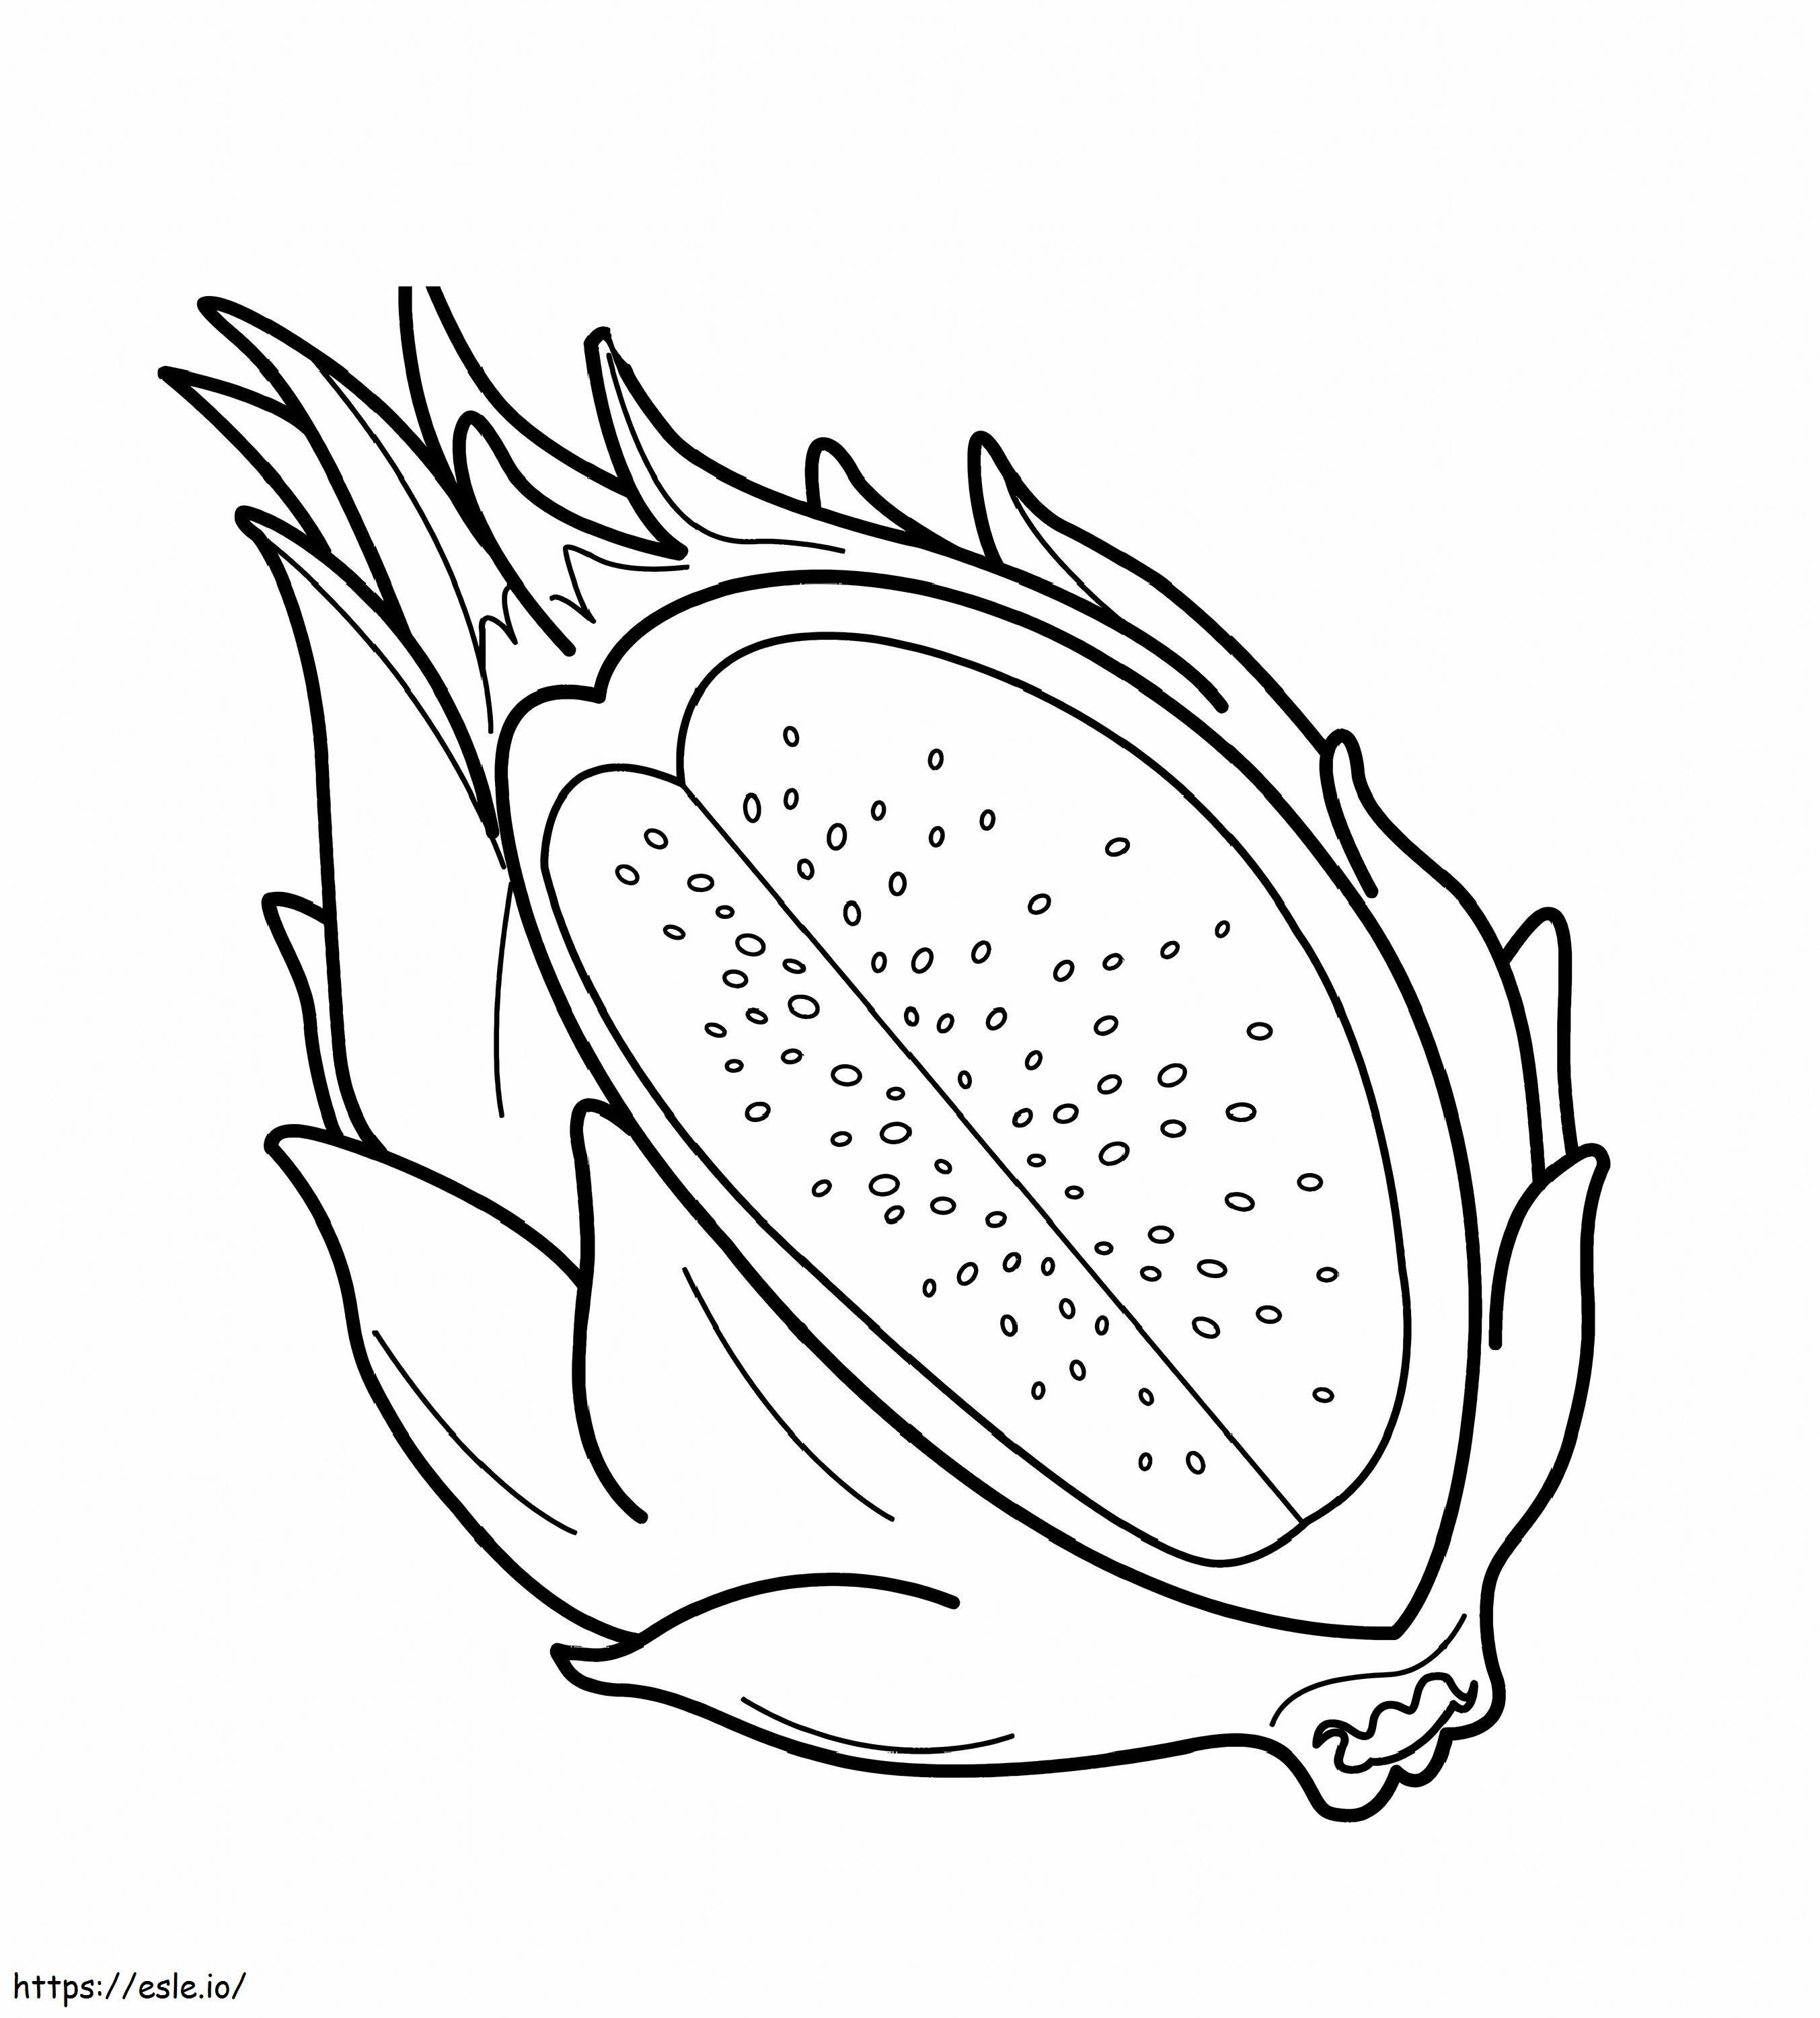 Dragon Fruit 2 coloring page